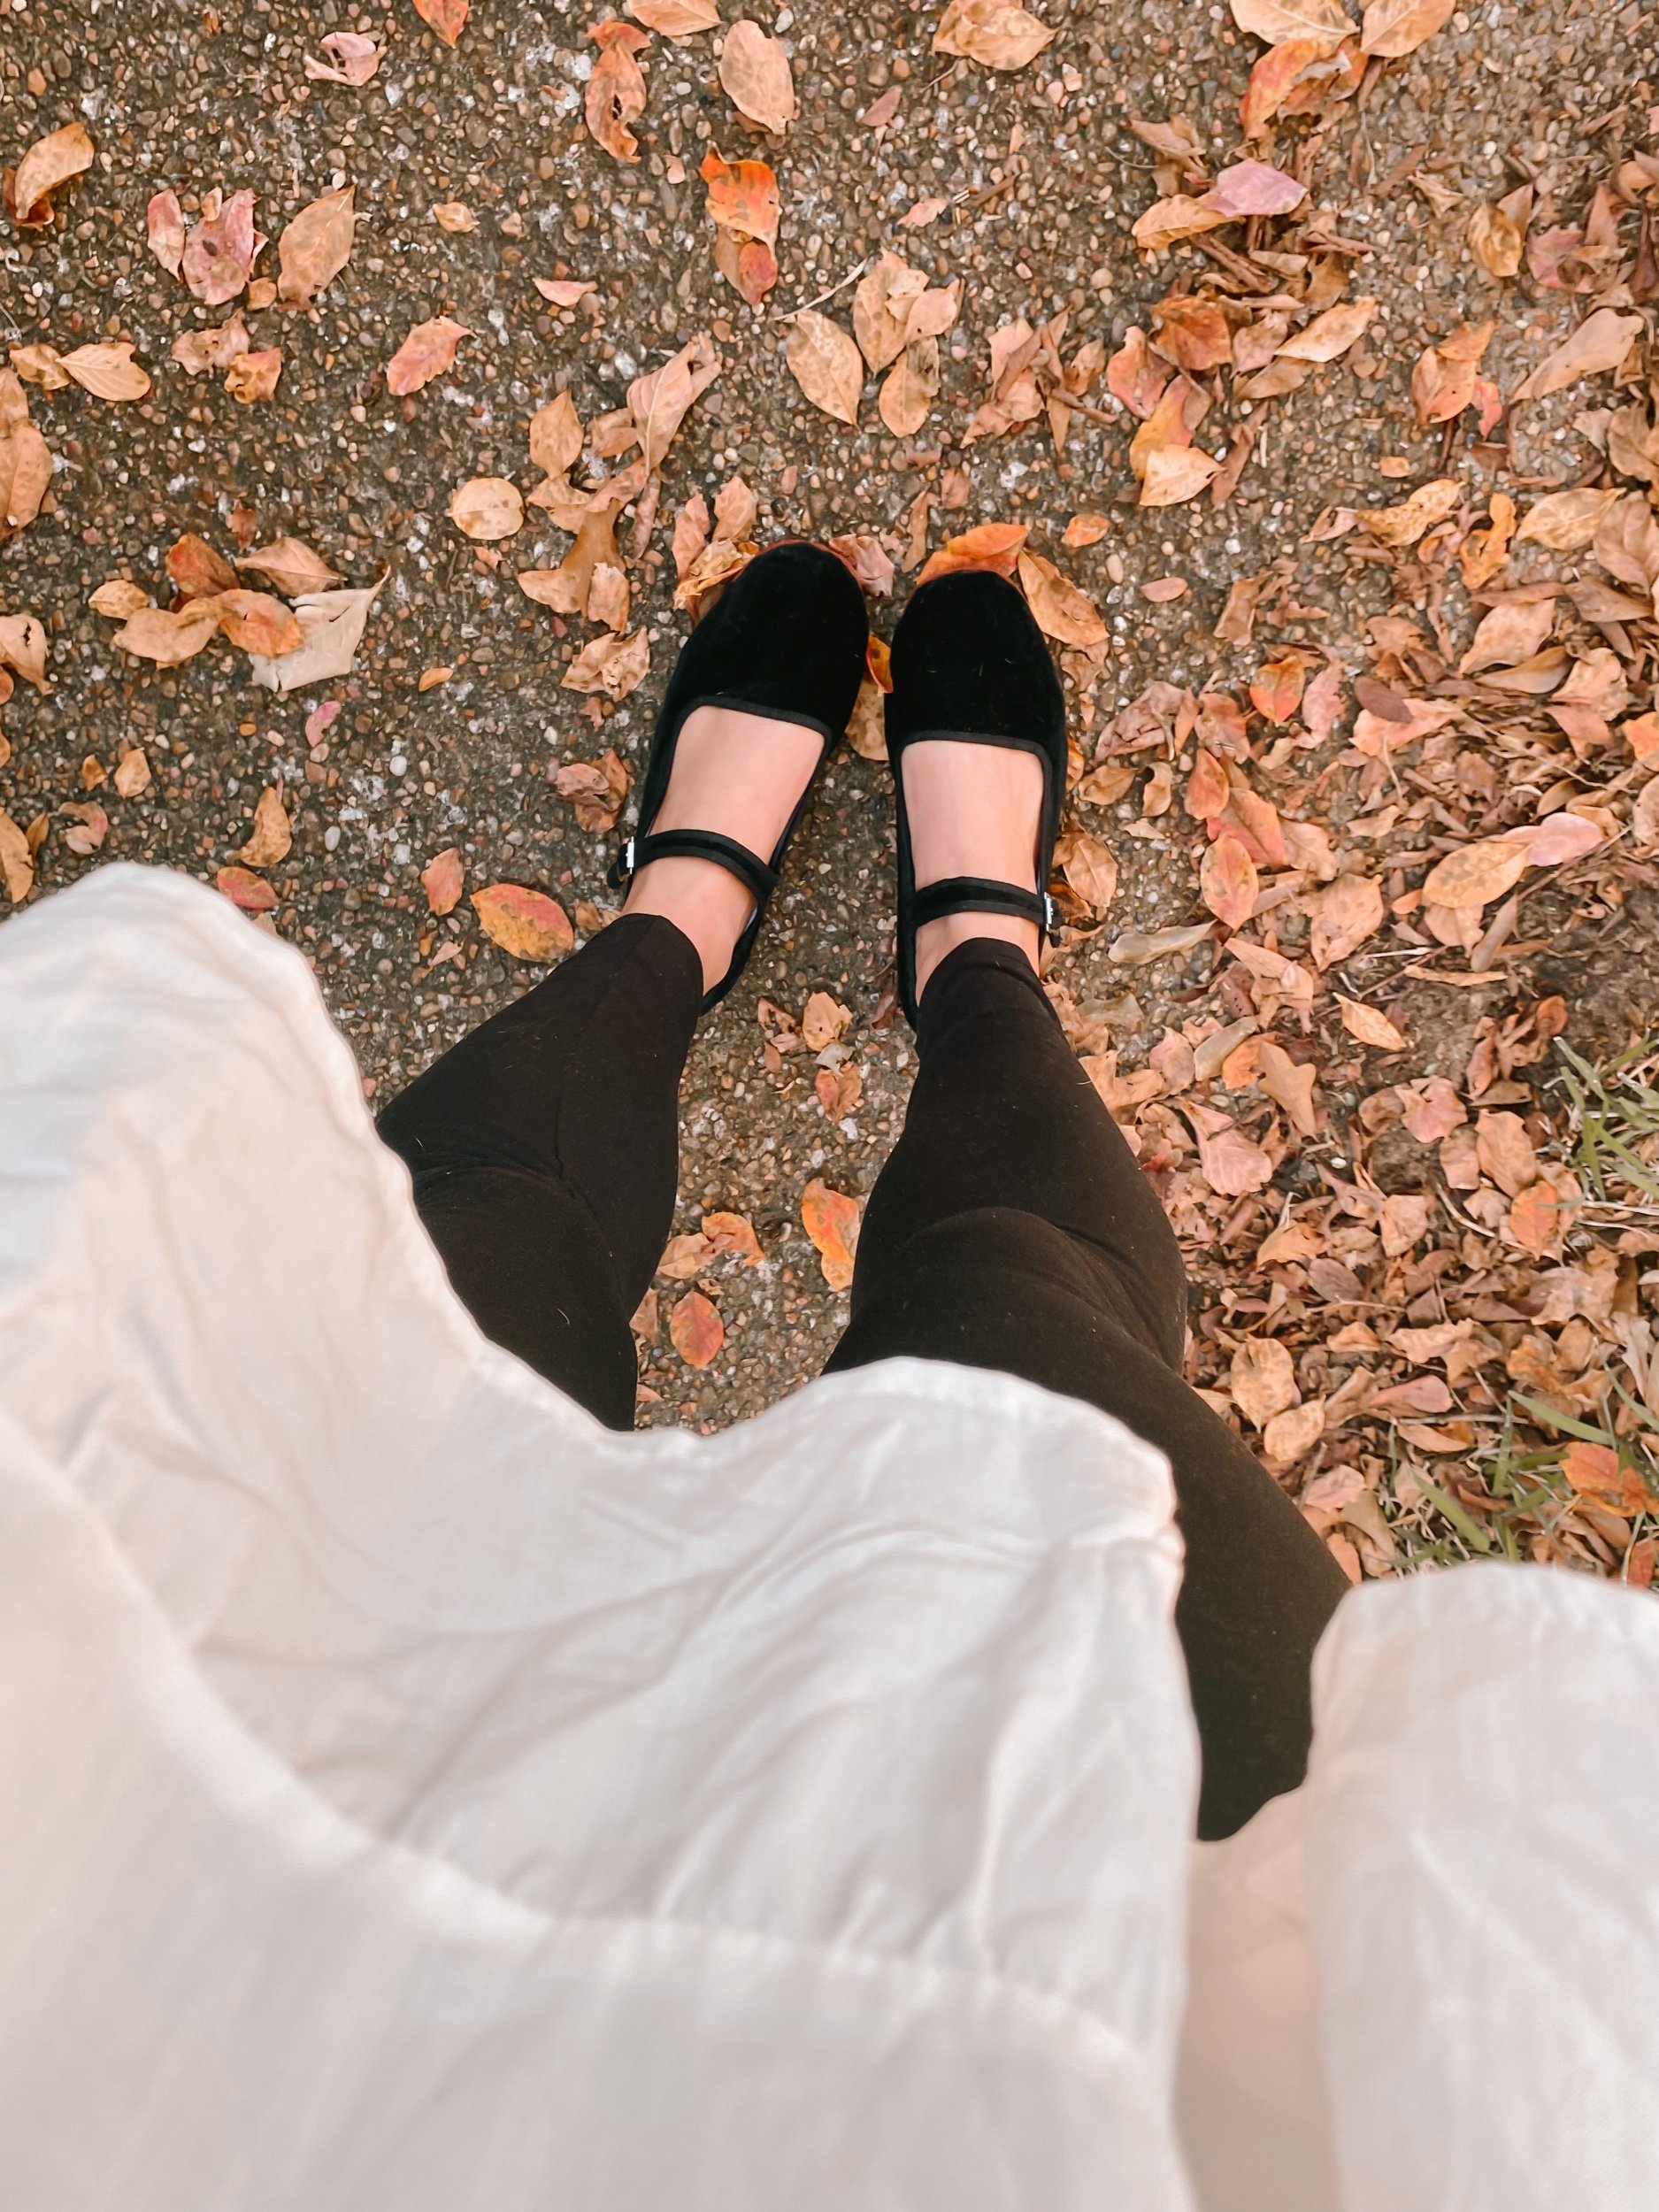 Three Heel Clicks - The $20 Pair of Flats You Need in Your Life